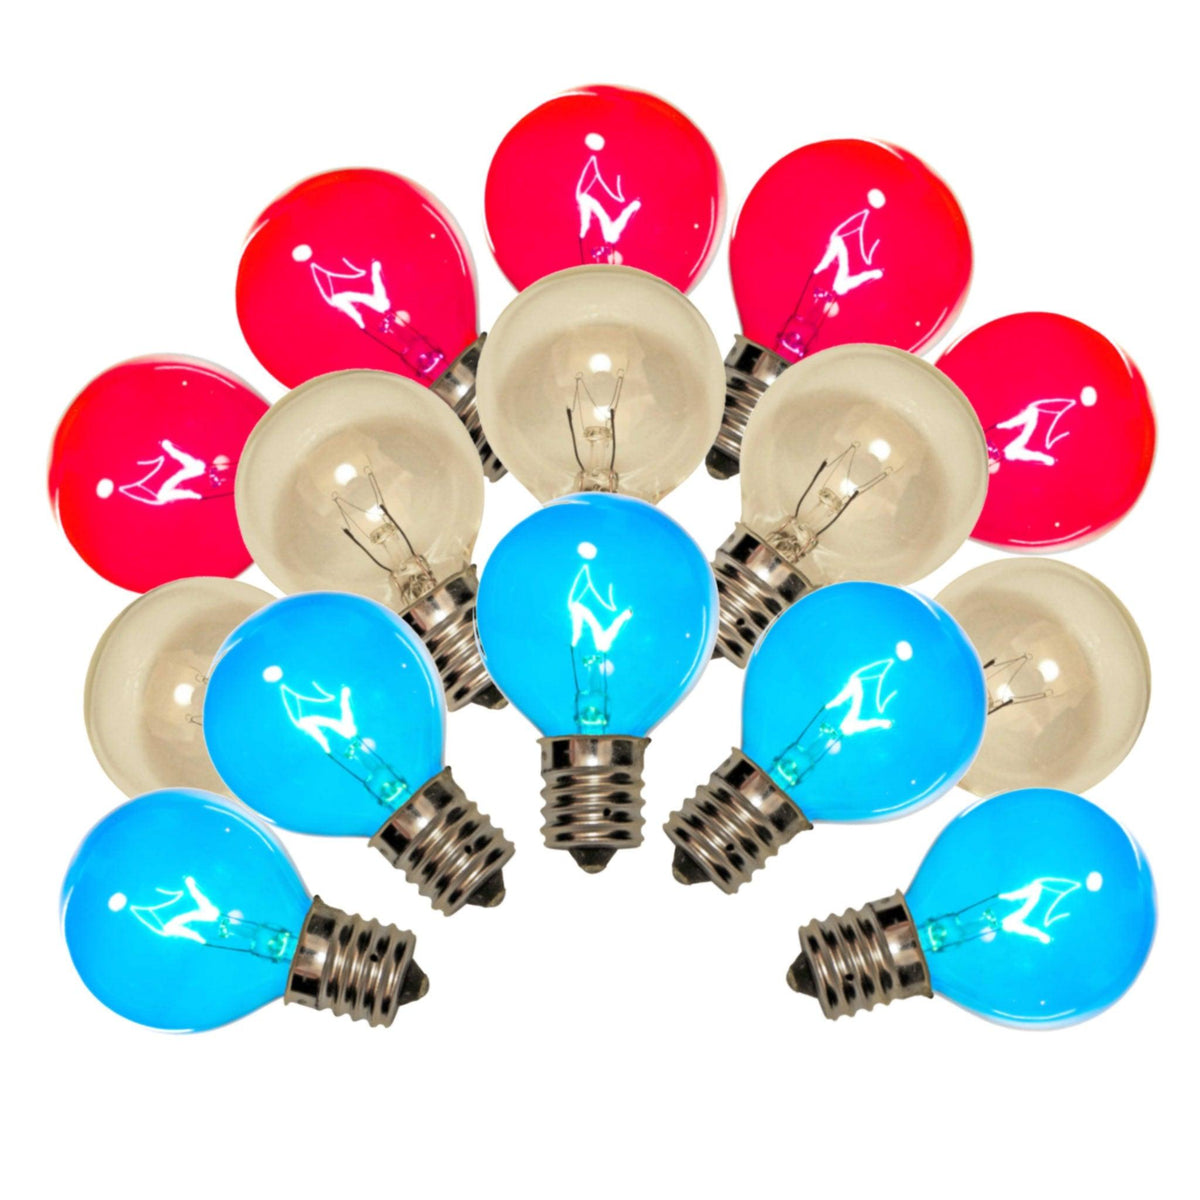 1 Box of 25 of brand new transparent Multi-Color Red, White, & Blue 4th of July G40 Globe Light Bulbs on sale at leedisplay.com